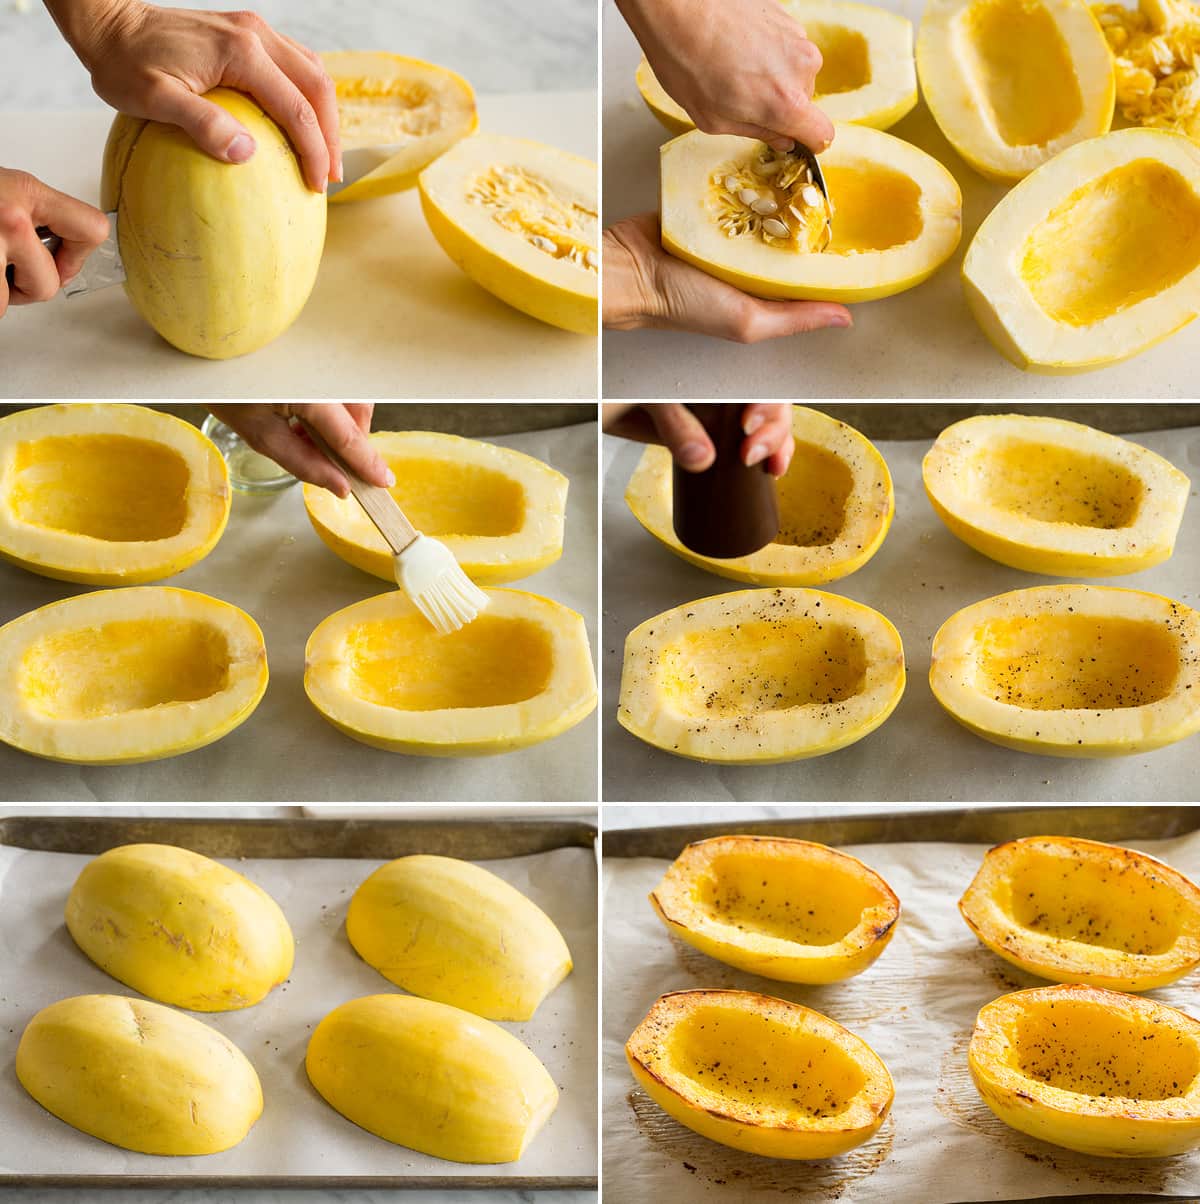 Collage of six images showing how to prepare spaghetti squash for roasting, then showing it before and after roasting on a baking sheet.